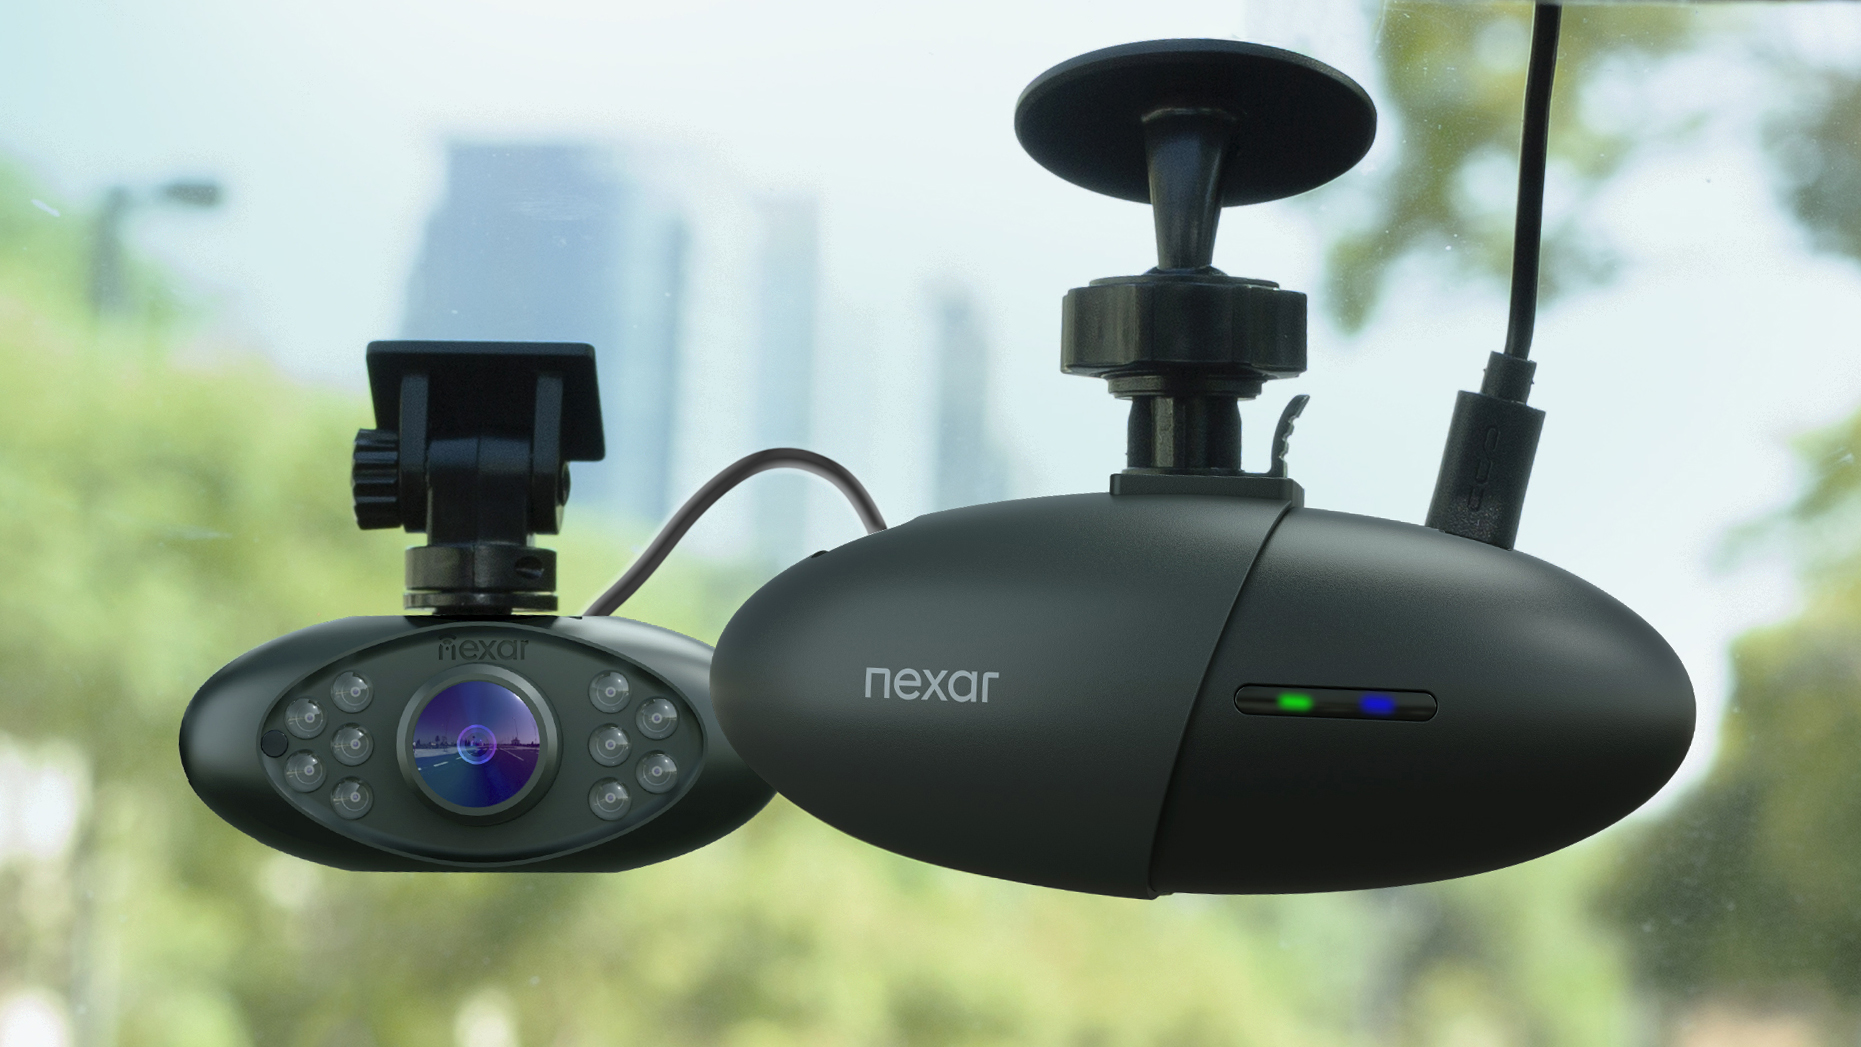 Introducing Our Most Powerful Dash Cam - Nexar One 